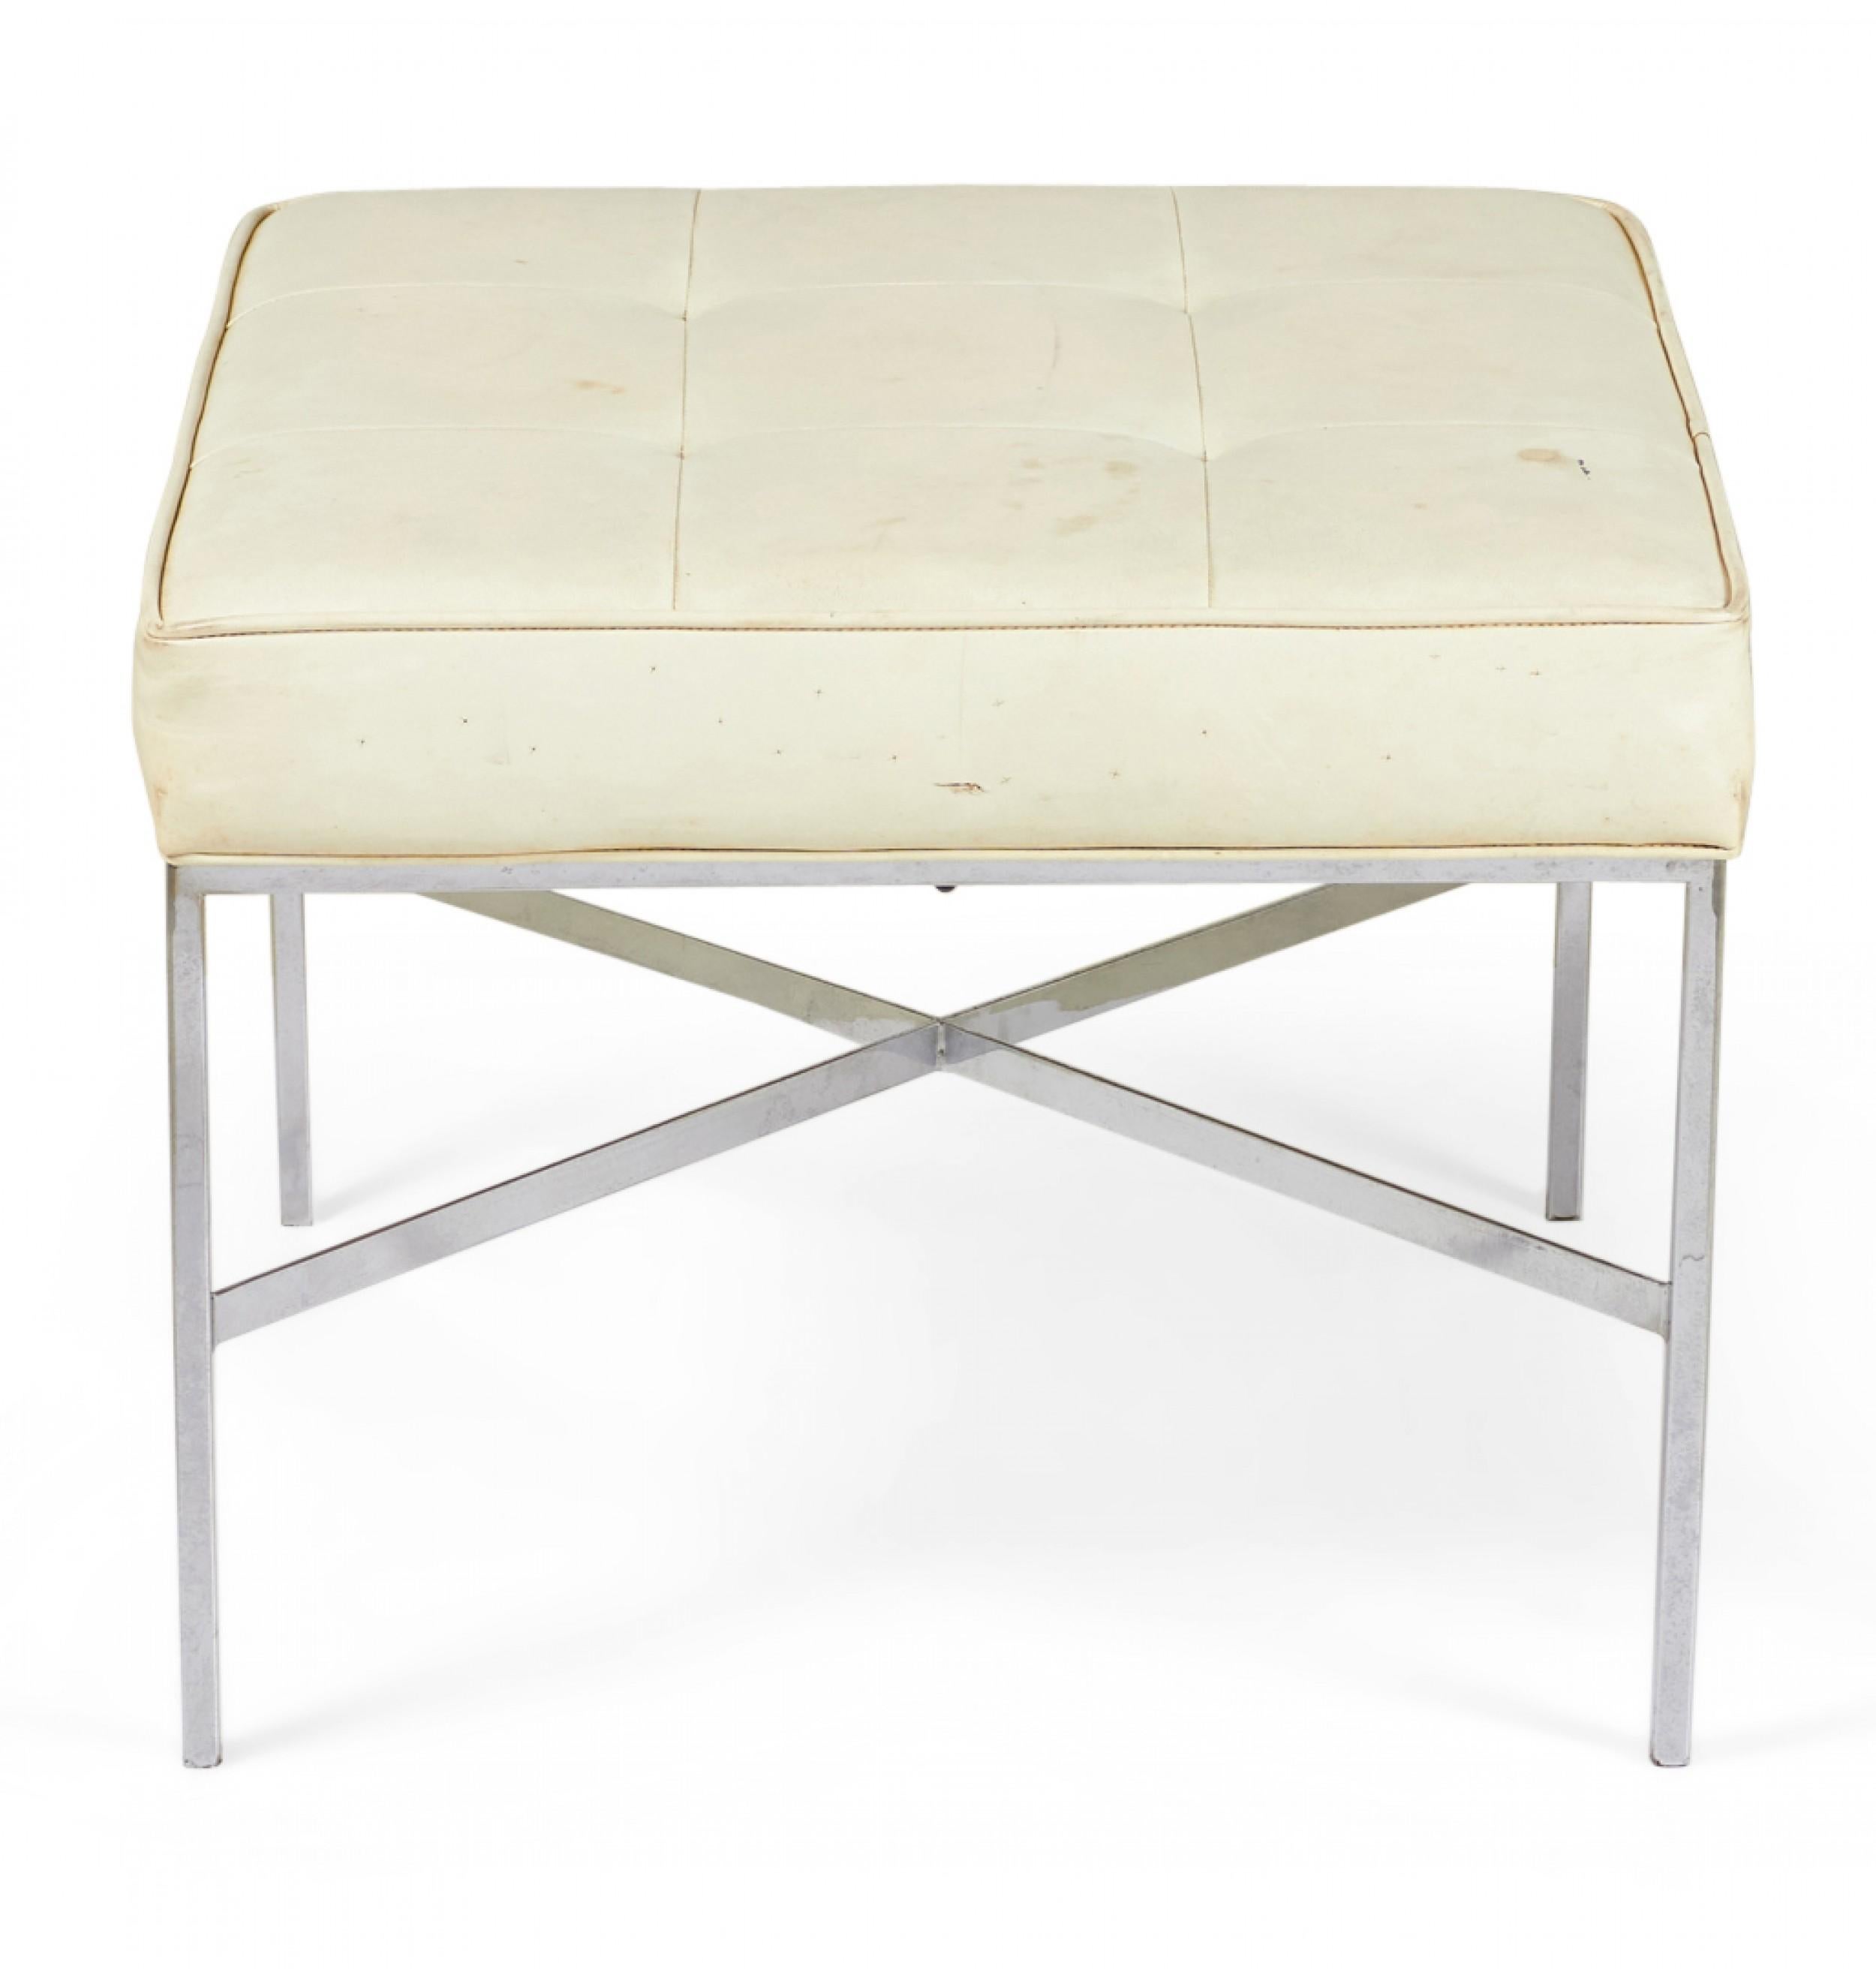 Metal Design Institute of Chrome and Button Tufted White Vinyl Square Bench For Sale